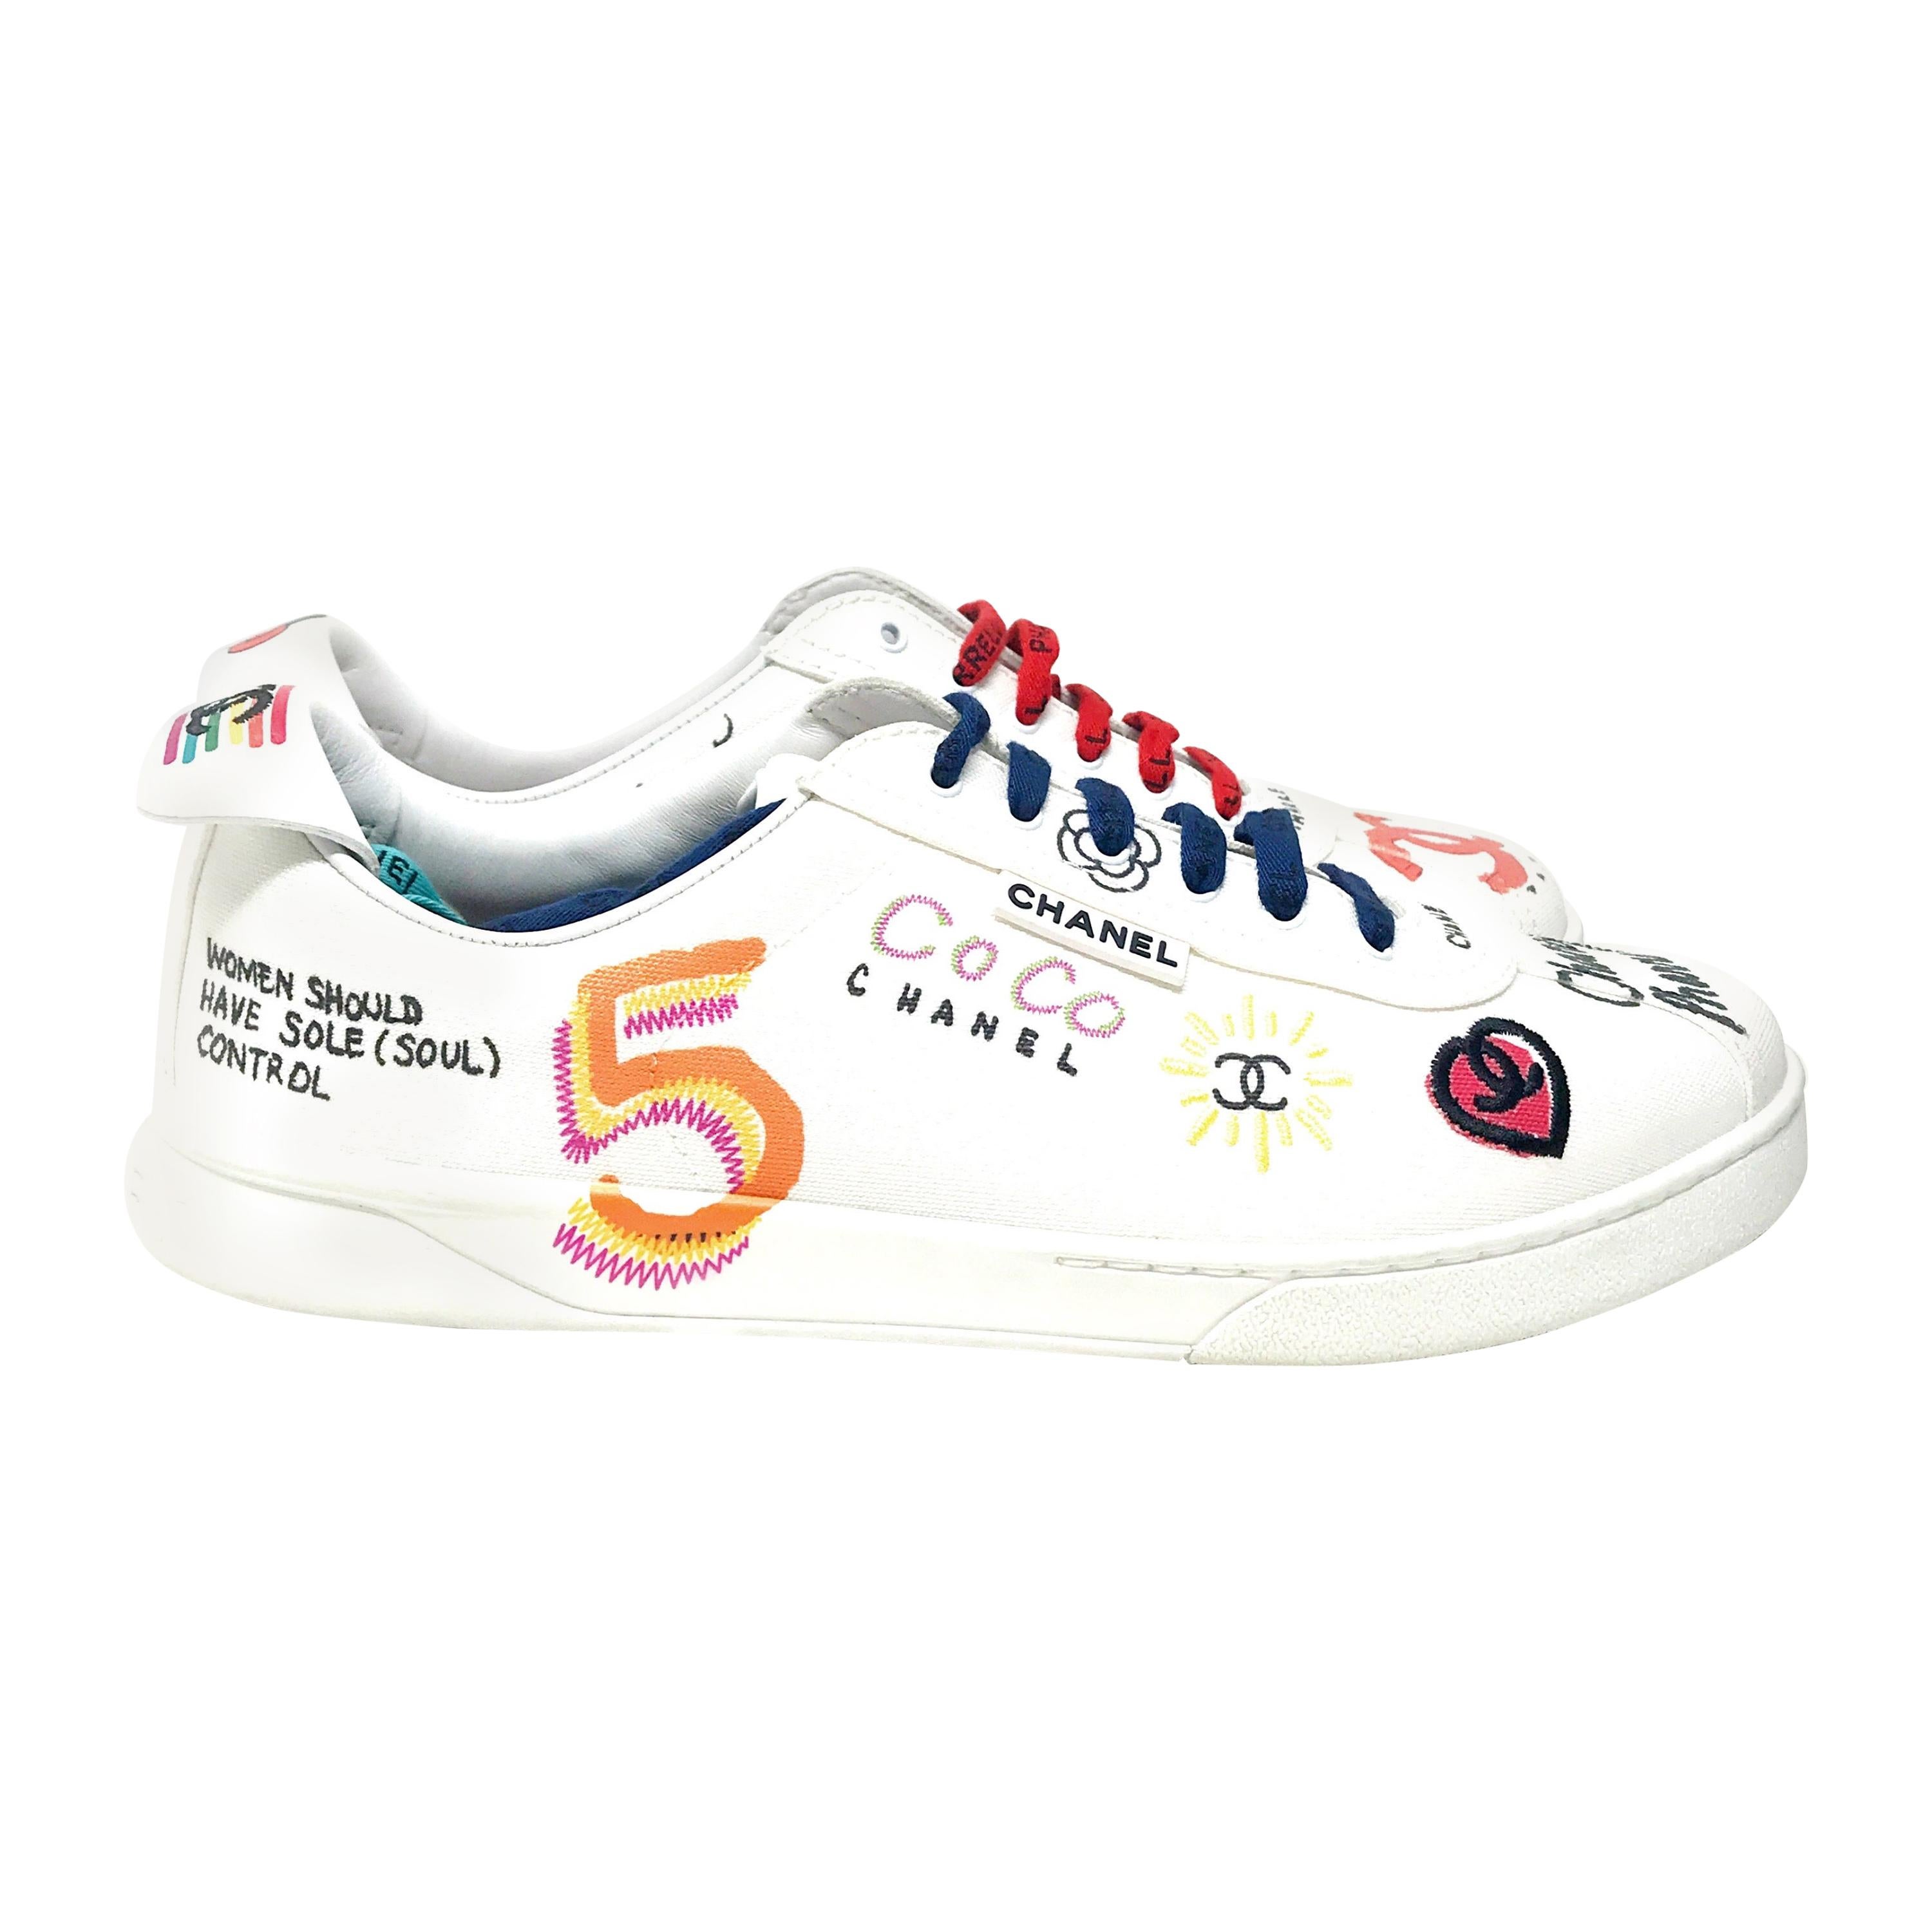 Chanel Pharrell Sneakers - 2 For Sale on 1stDibs  coco chanel pharrell  sneakers, chanel pharrell shoes, pharrell chanel sneakers